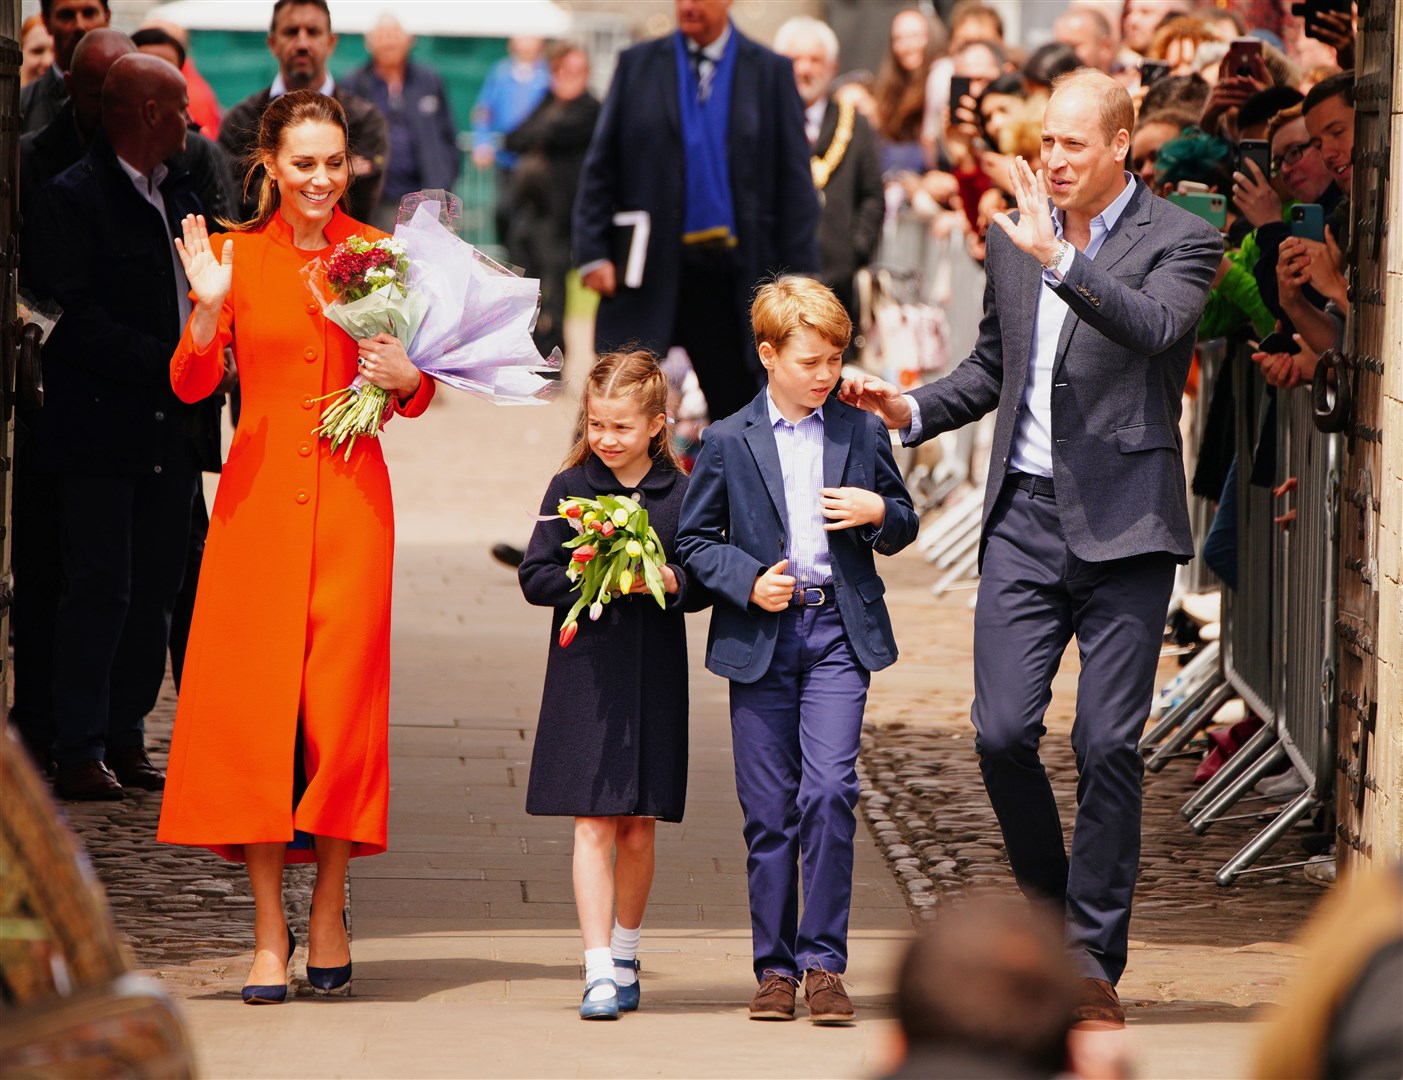 The Duke and Duchess of Cambridge, Prince George and Princess Charlotte on a walkabout during their visit to Cardiff Castle (Ben Birchall/PA)